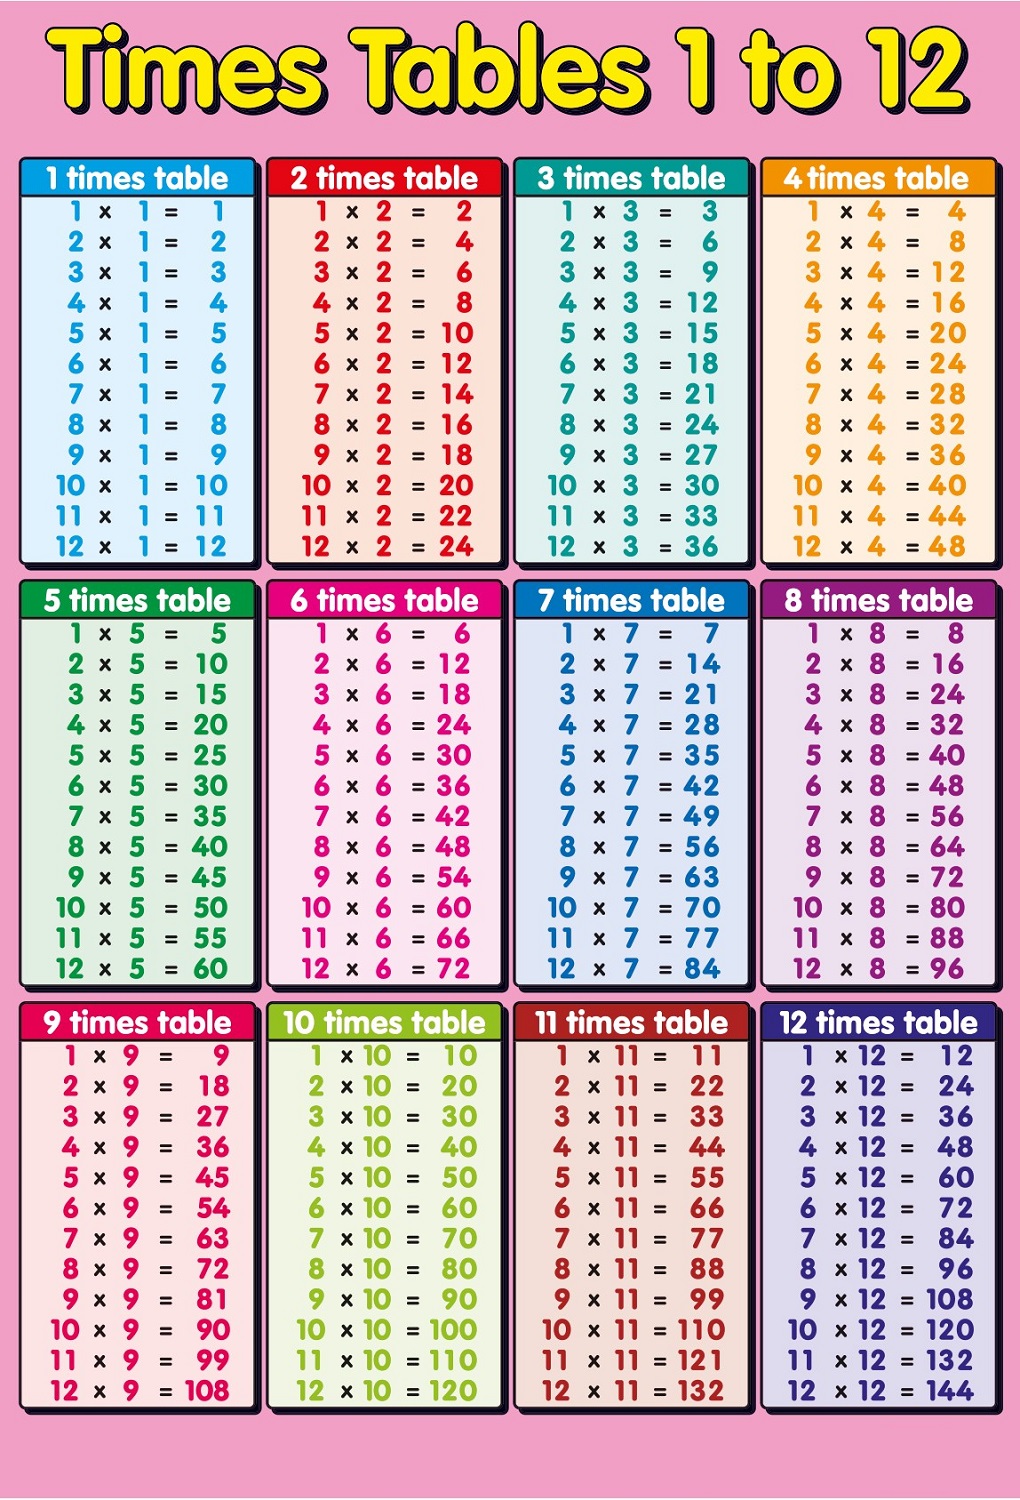 times table chart pink